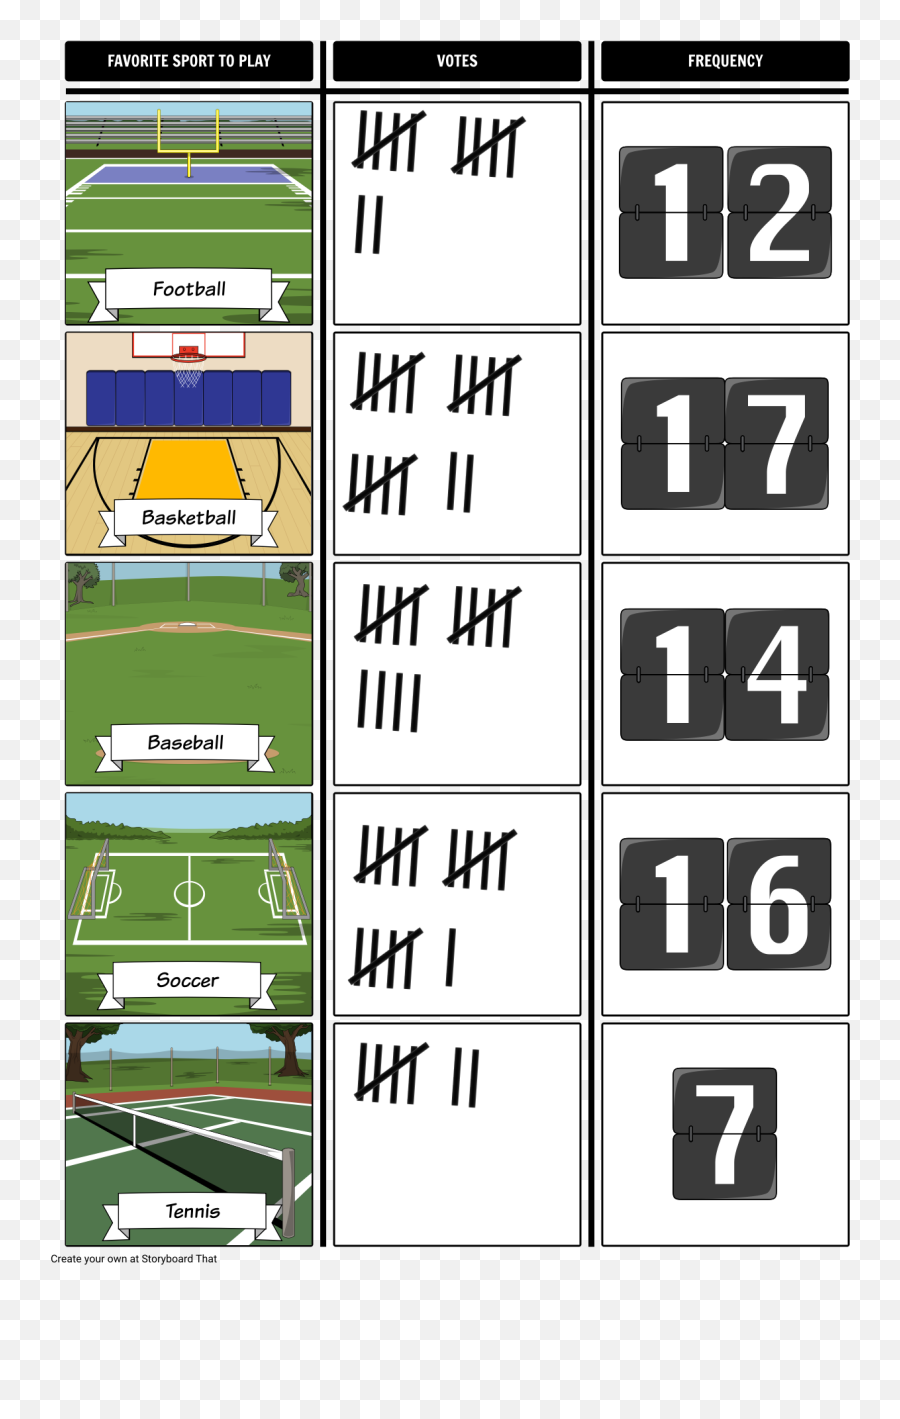 Tally Chart With Frequency - Tally Charts In Sport Png,Tally Marks Png